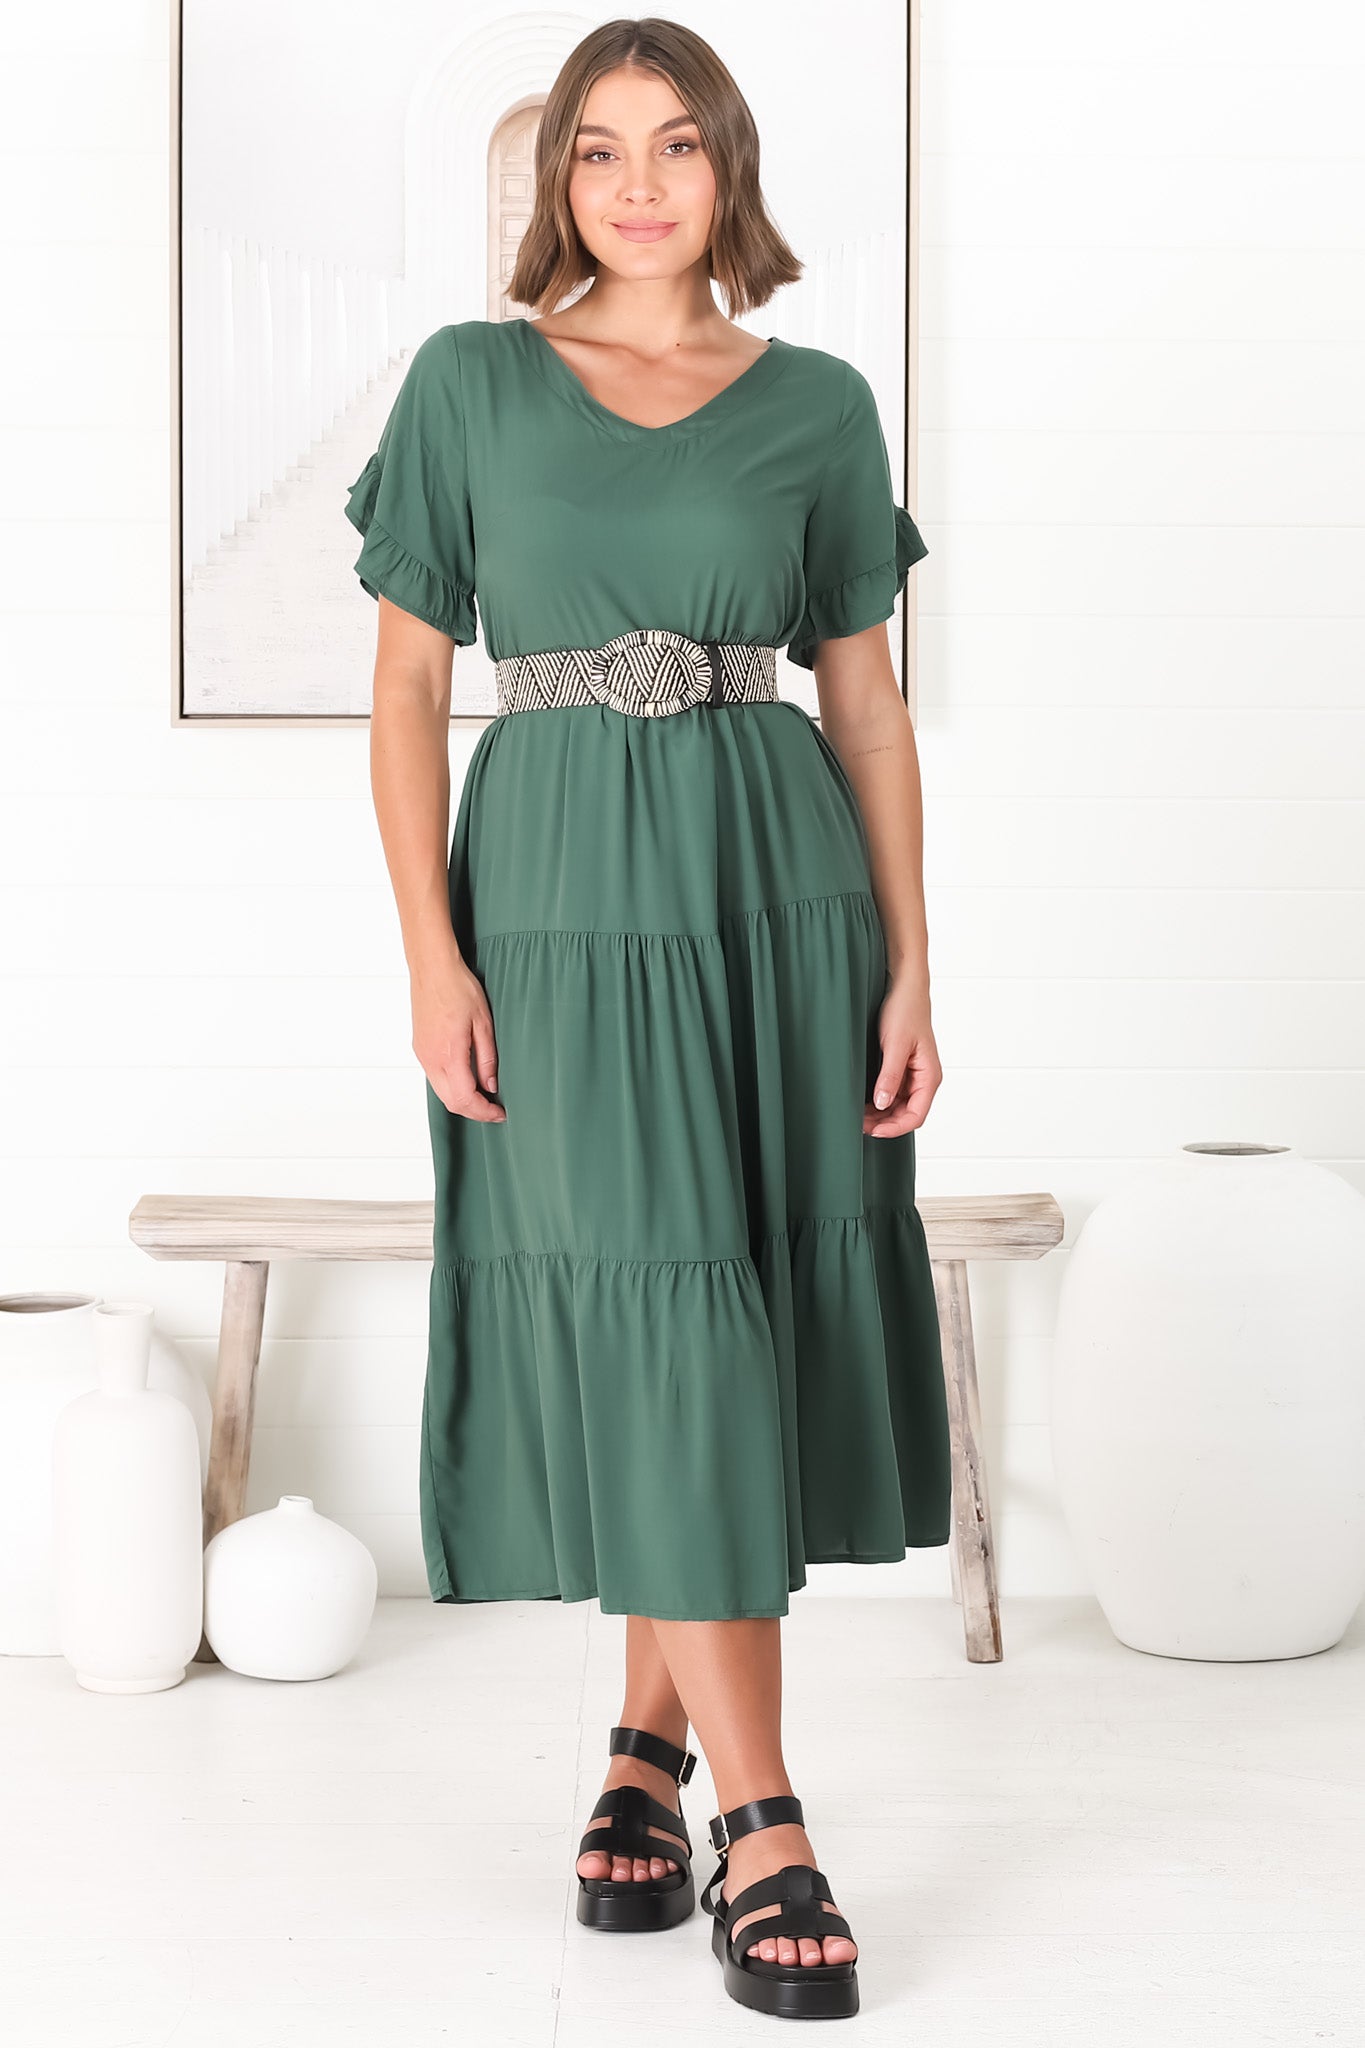 Ame Midi Dress - V Neck Frill Sleeve Tiered Dress in Emerald